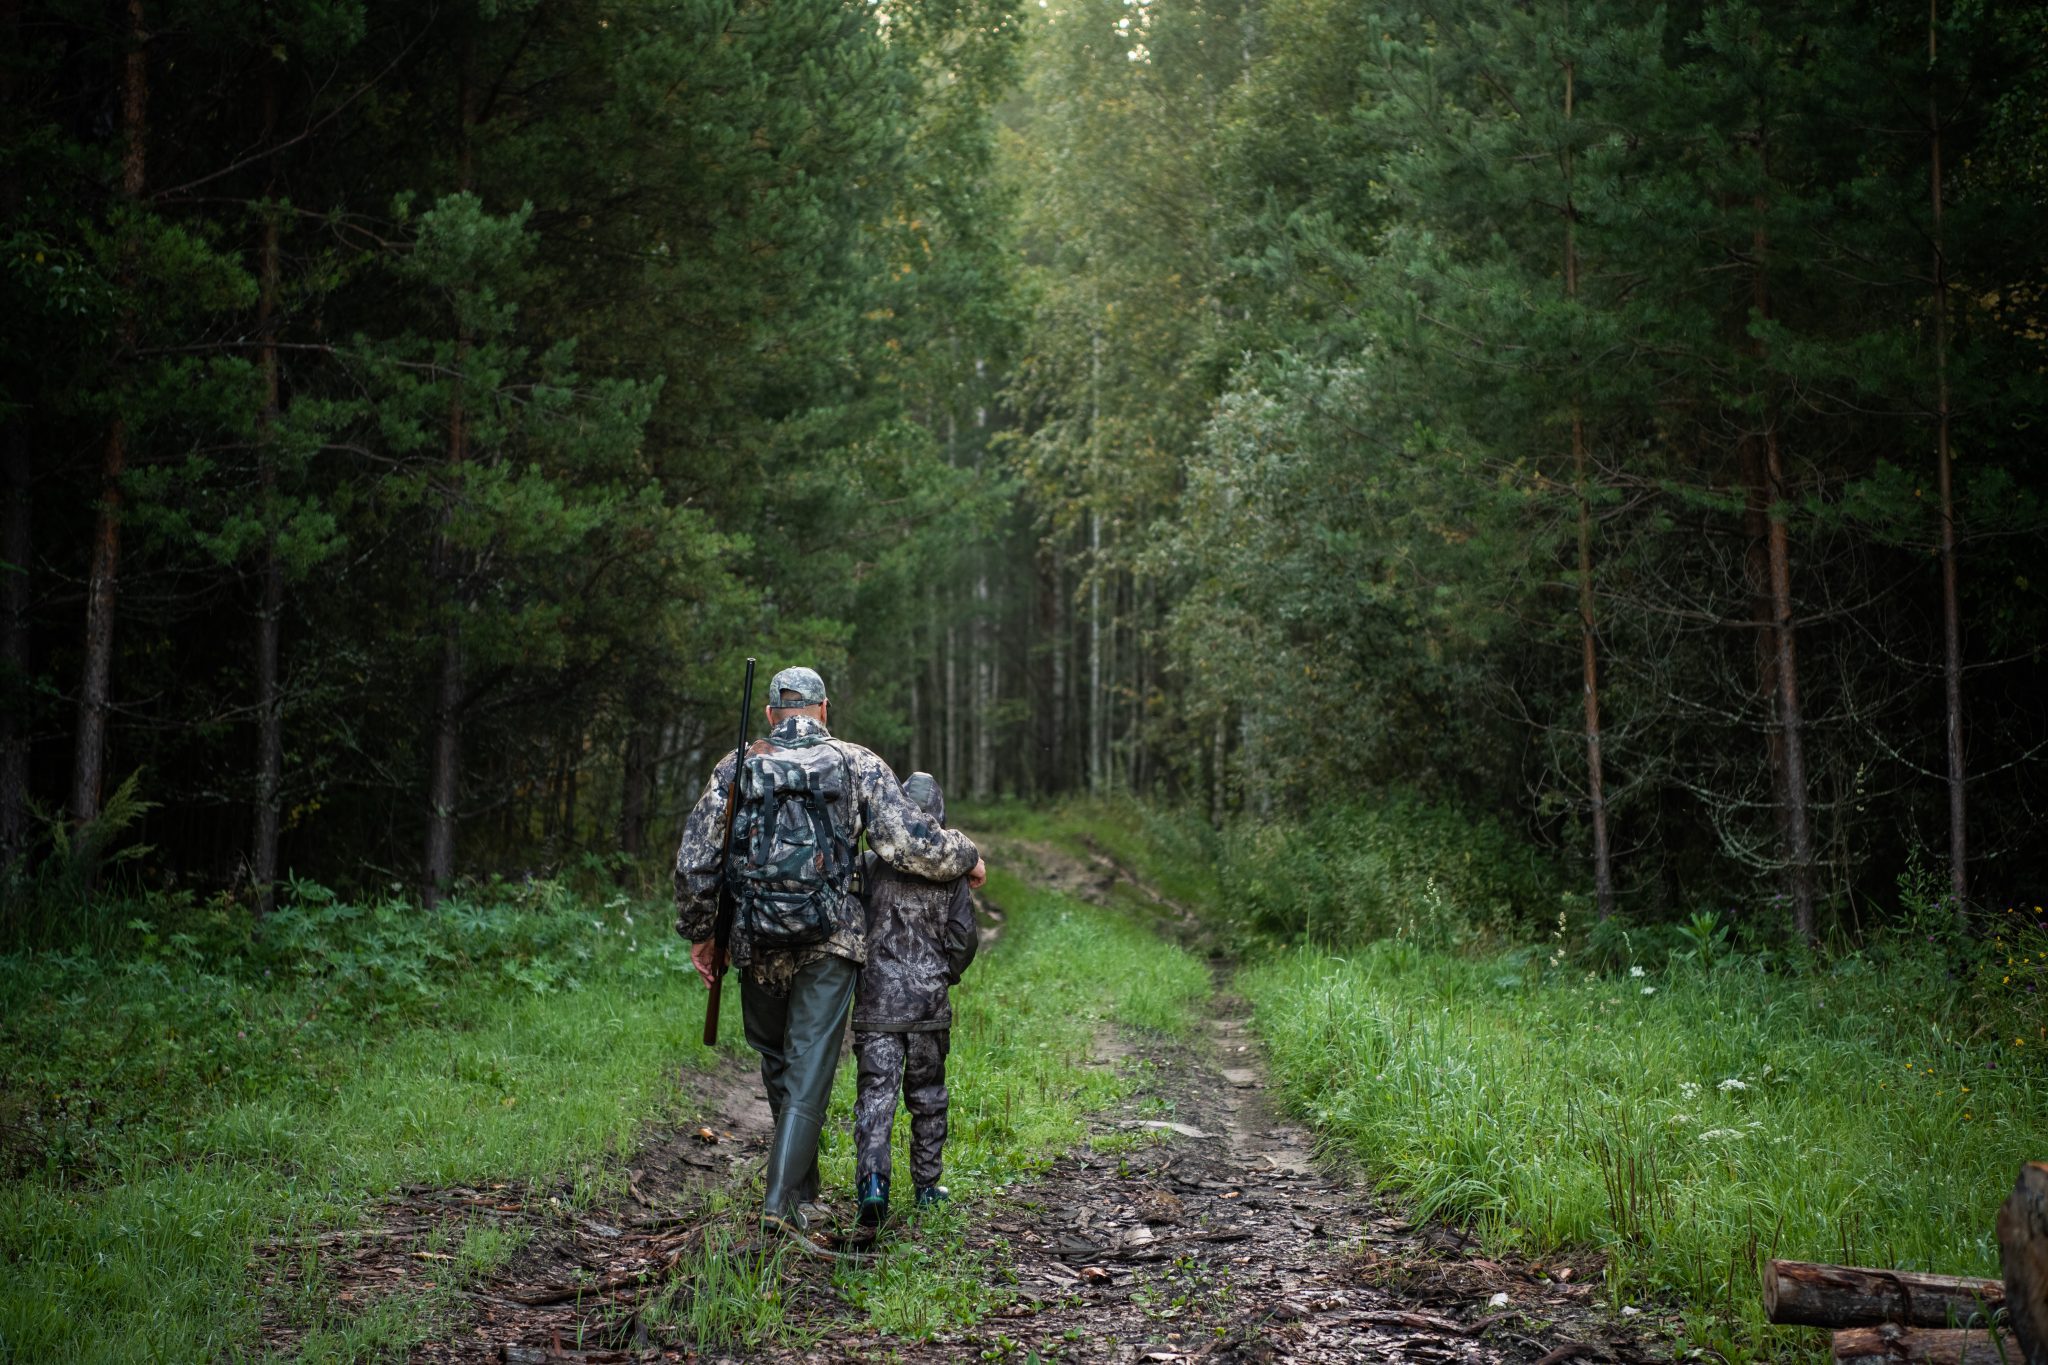 A father and son walking a hunting trail together